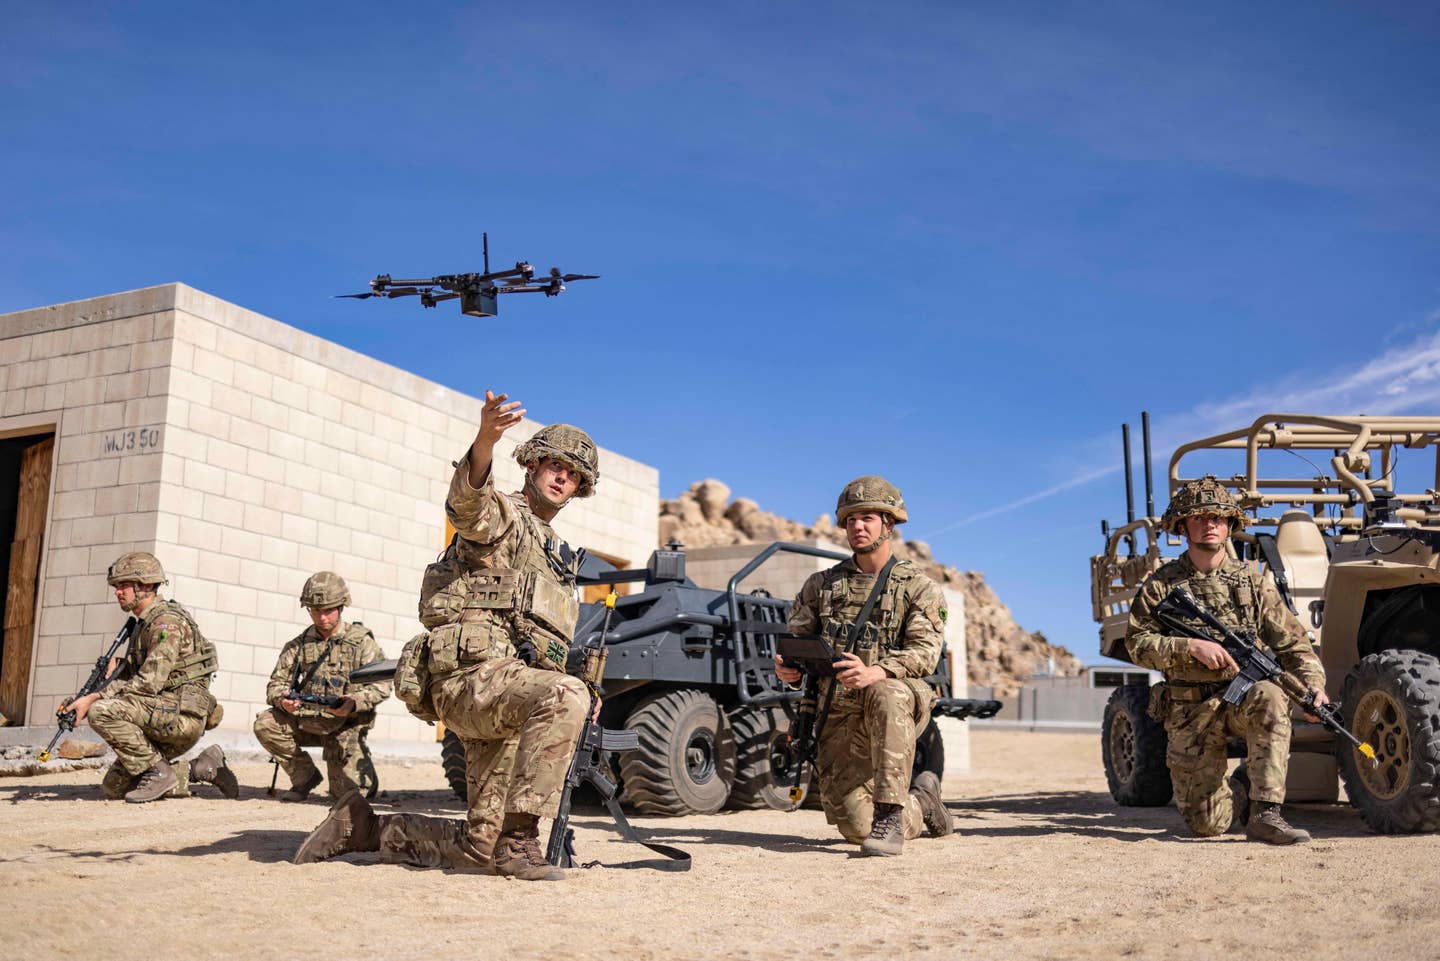 British soldiers launch a SkyDIO unmanned aerial vehicle (UAV) during Project Convergence 22 at Fort Irwin, California. <em>Army Futures Command</em>